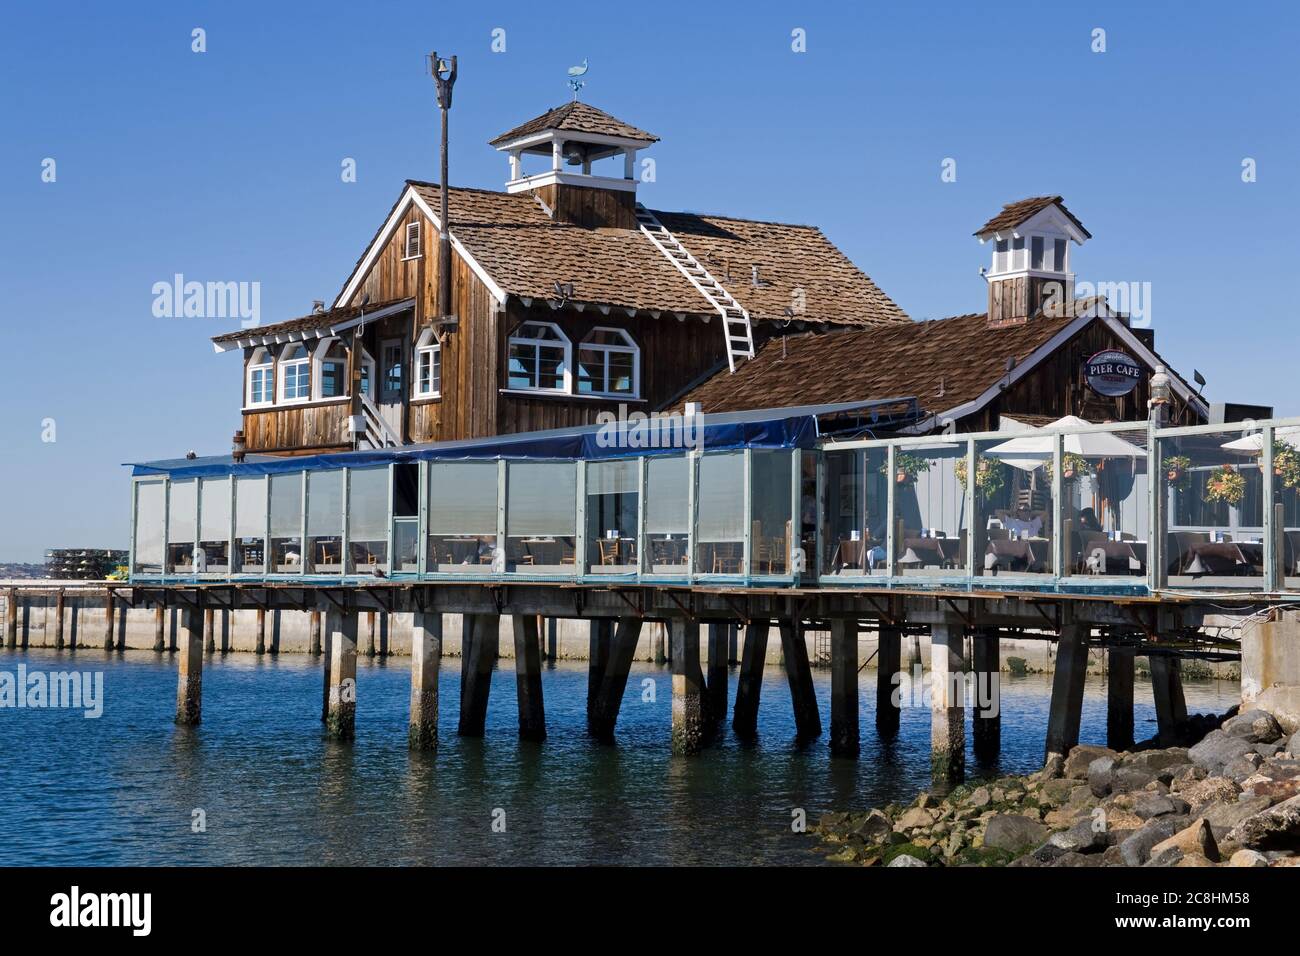 Pier Cafe in Seaport Village, San Diego, California, United States Stock Photo